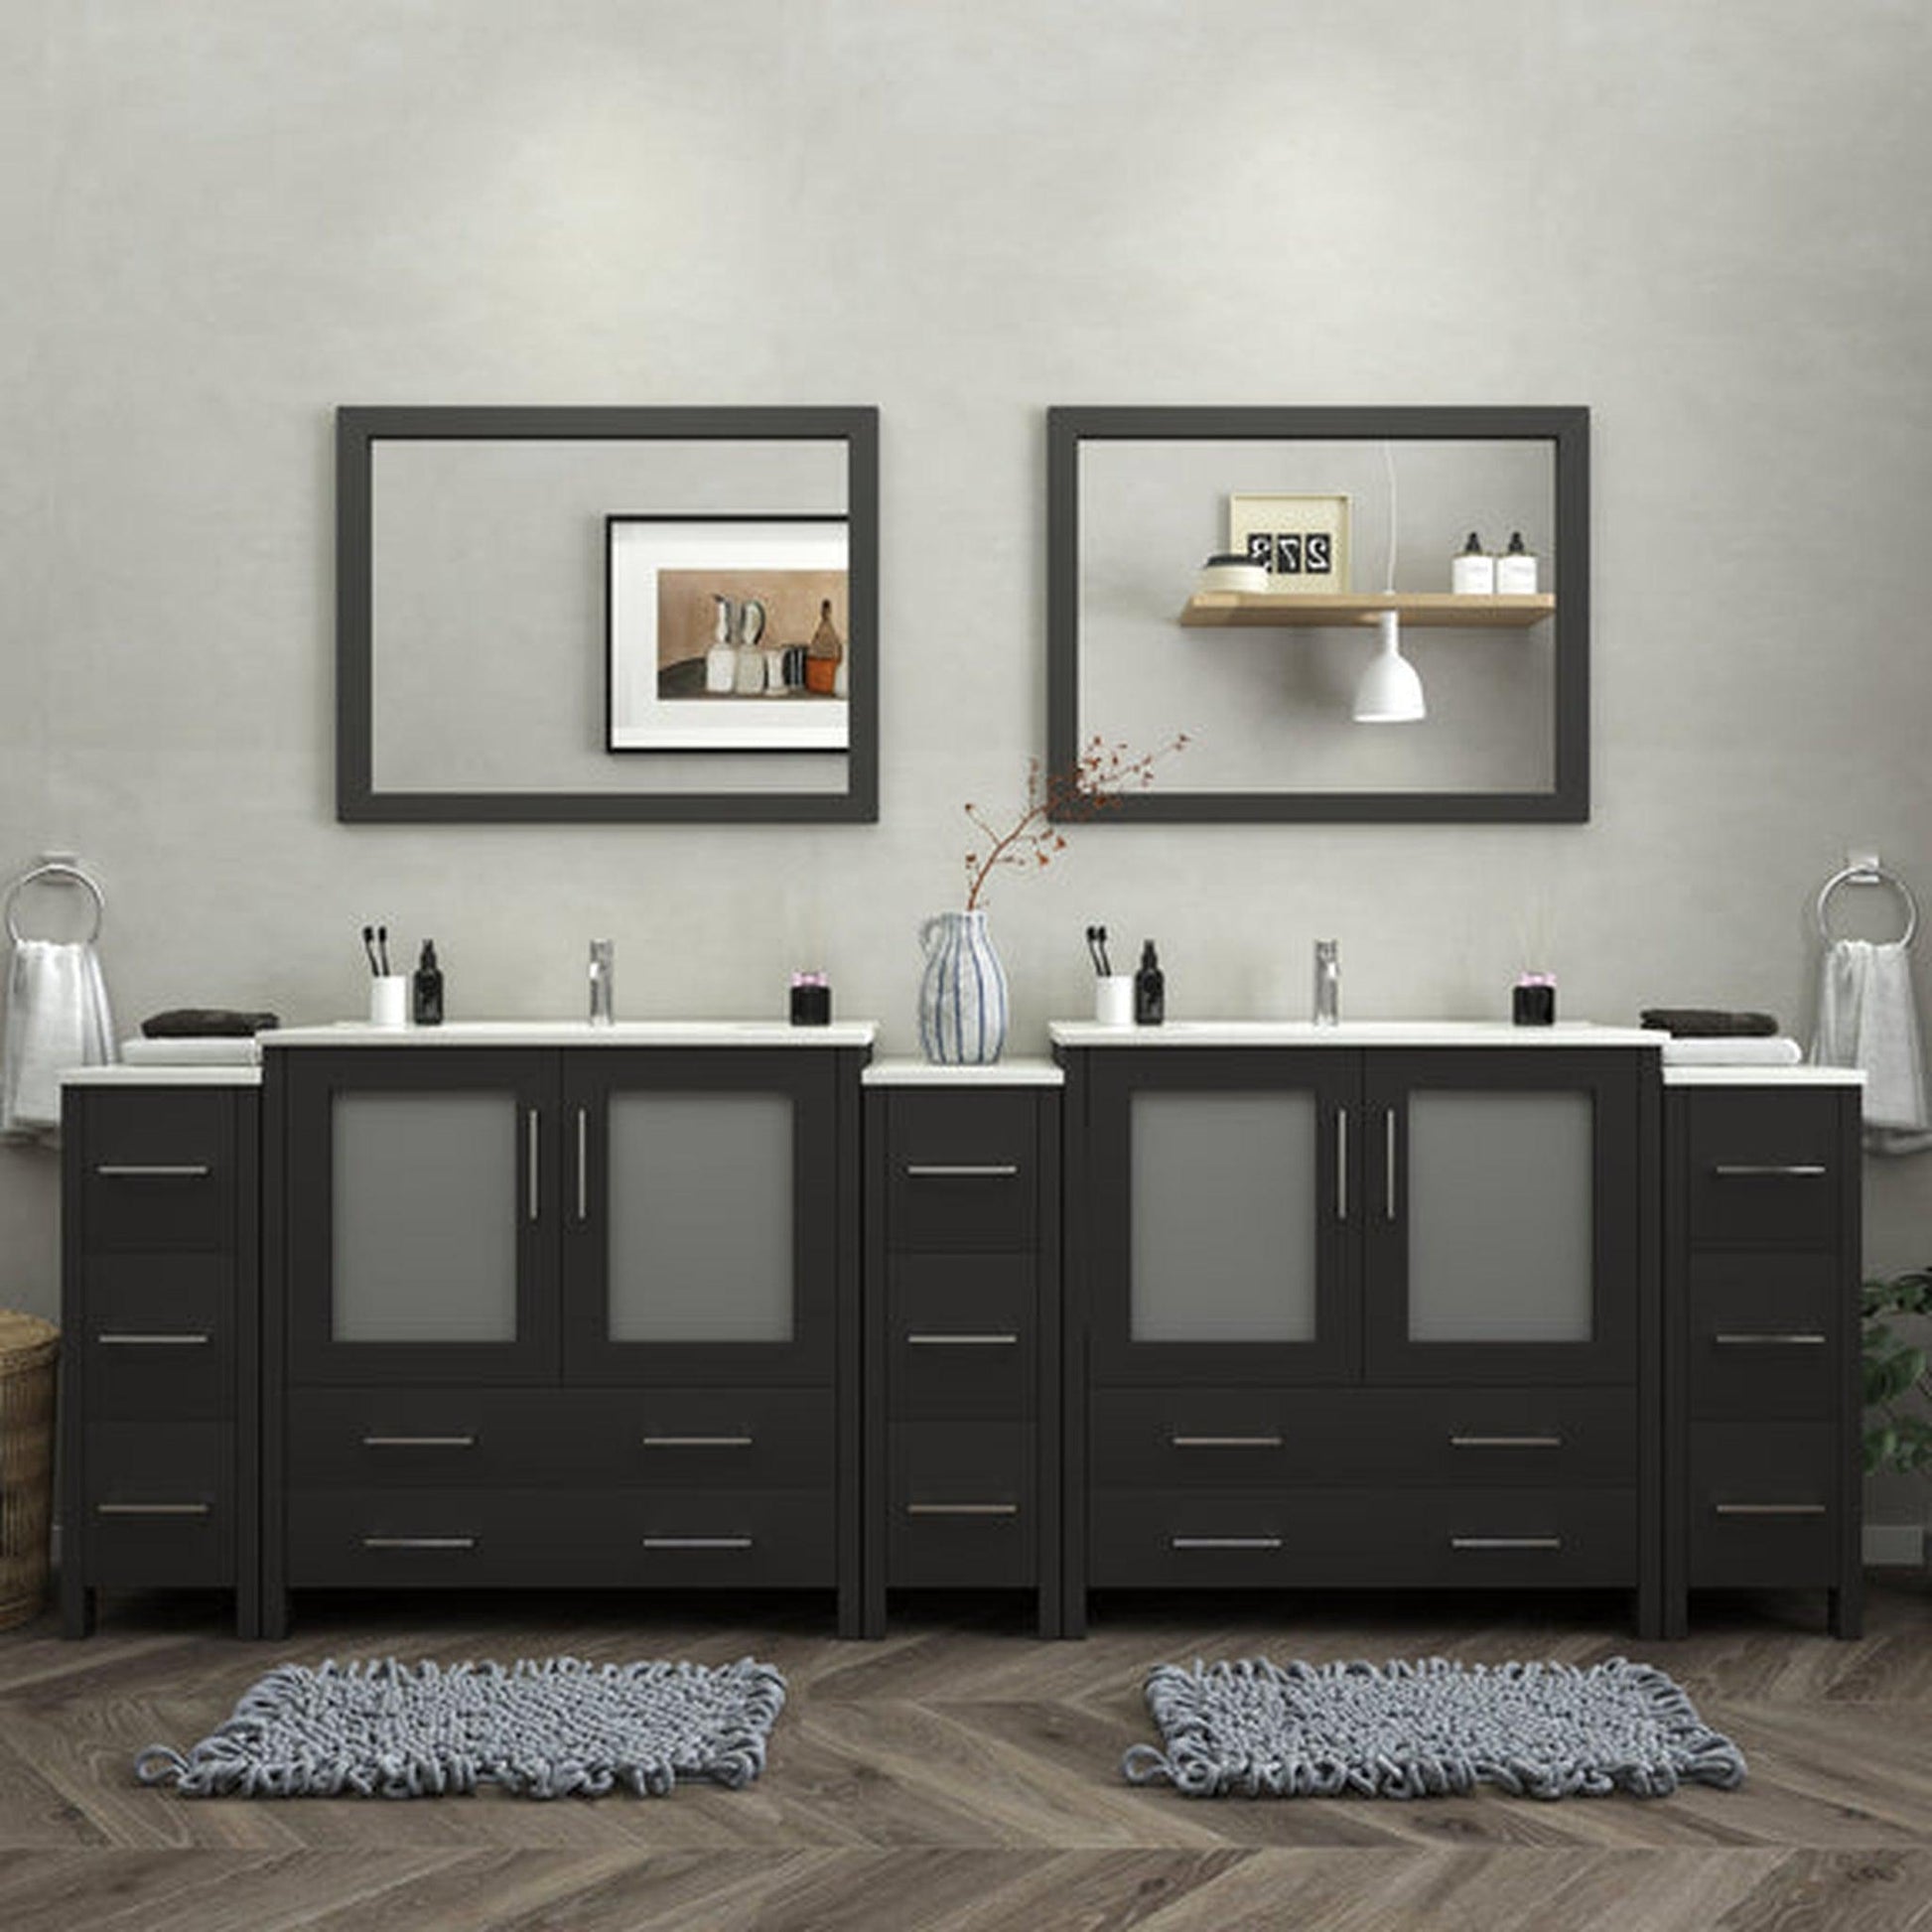 Vanity Art Brescia 108" Double Espresso Freestanding Modern Bathroom Vanity Set With Integrated Ceramic Sink, 2 Shelves, 13 Dovetail Drawers and 2 Mirrors